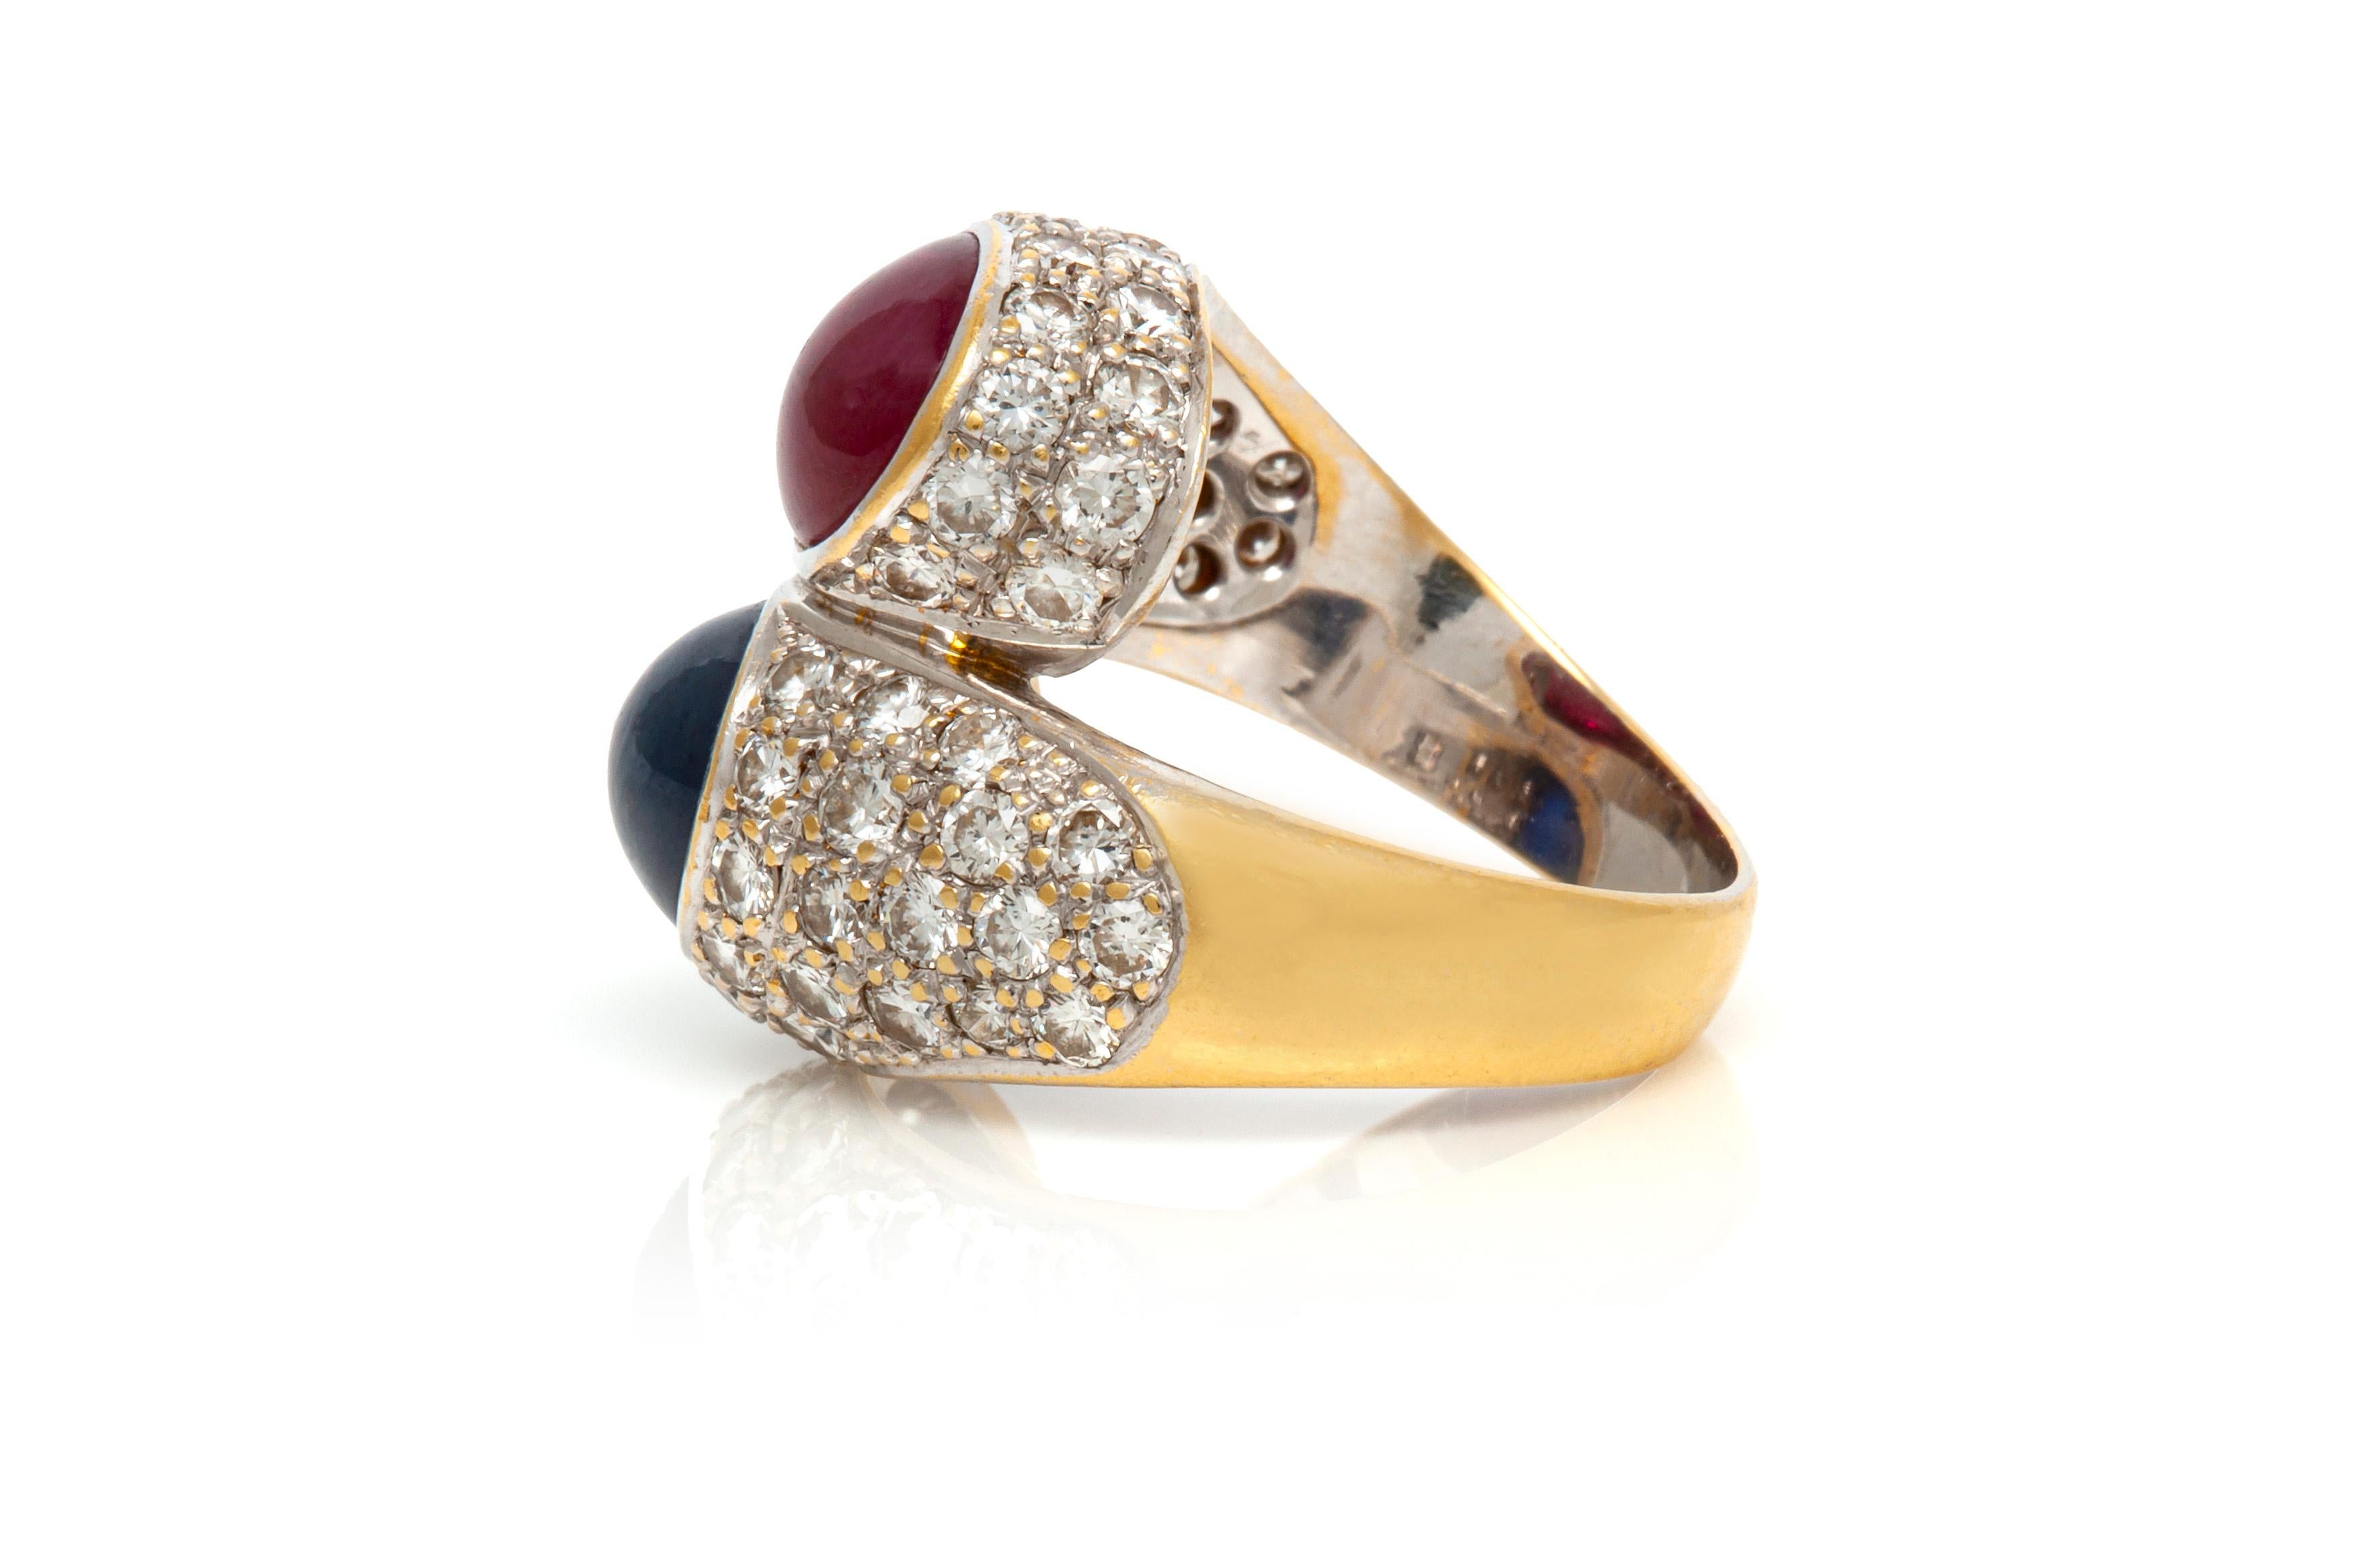 Ring finely crafted in 18K white gold with Cabochon Ruby and Sapphire surrounded with diamonds. 
The Cabochon Sapphire weighing approximately 4.00 carat.
The Cabochon Ruby weighing approximately 4.00 carat. 
The diamonds weighing approximately 3.20